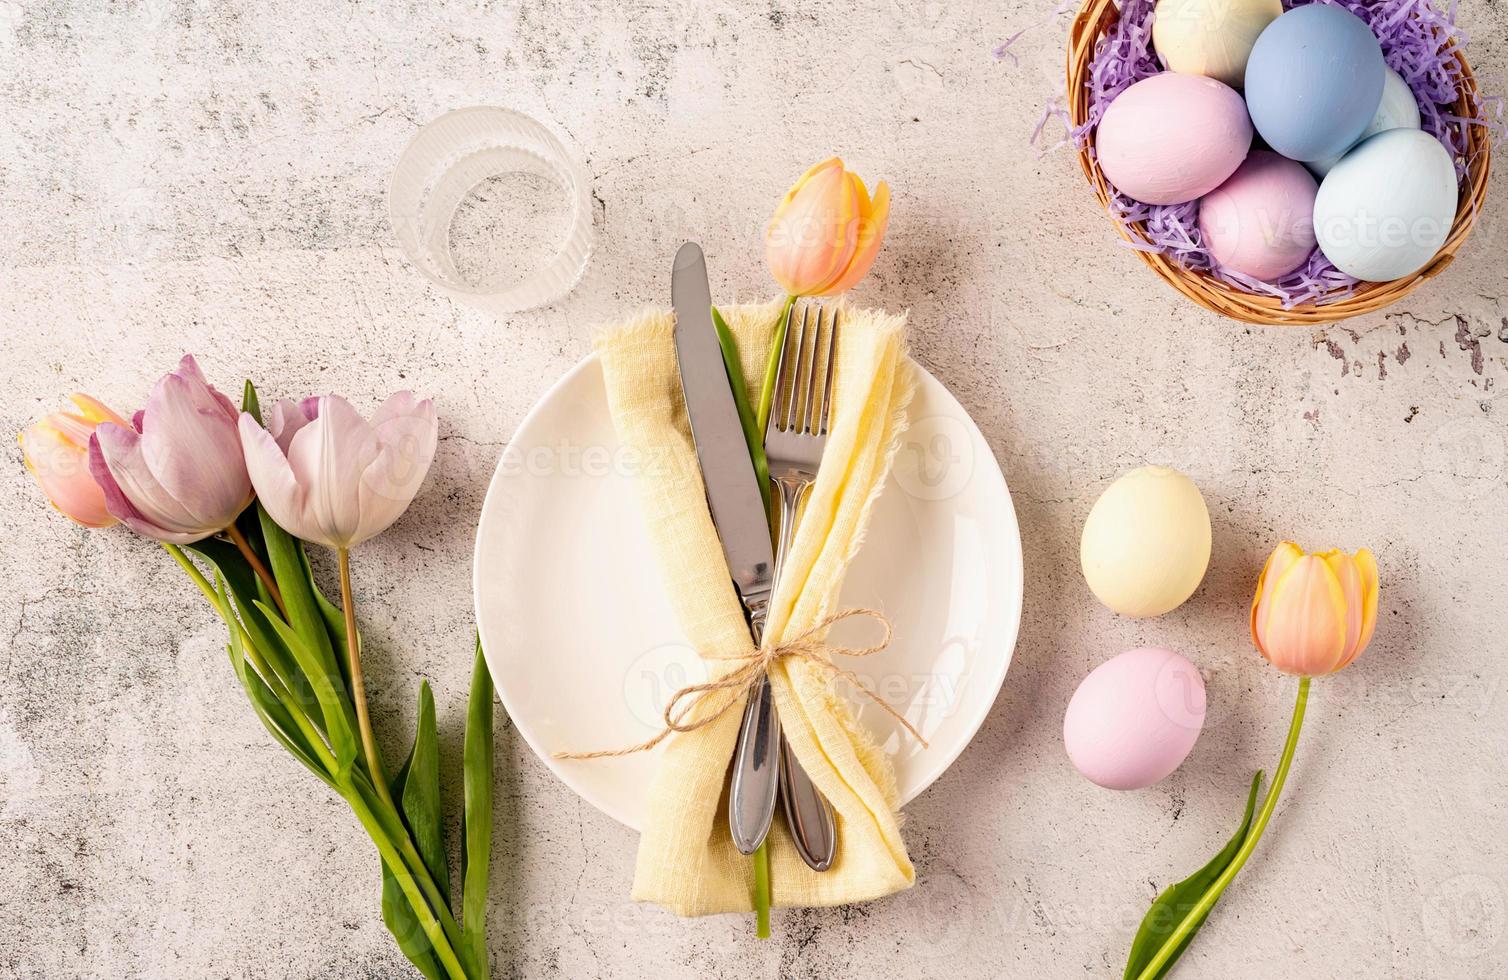 Table setting for Easter feast. Easter eggs, bunny, tulips and cutlery top view flat lay on concrete background photo